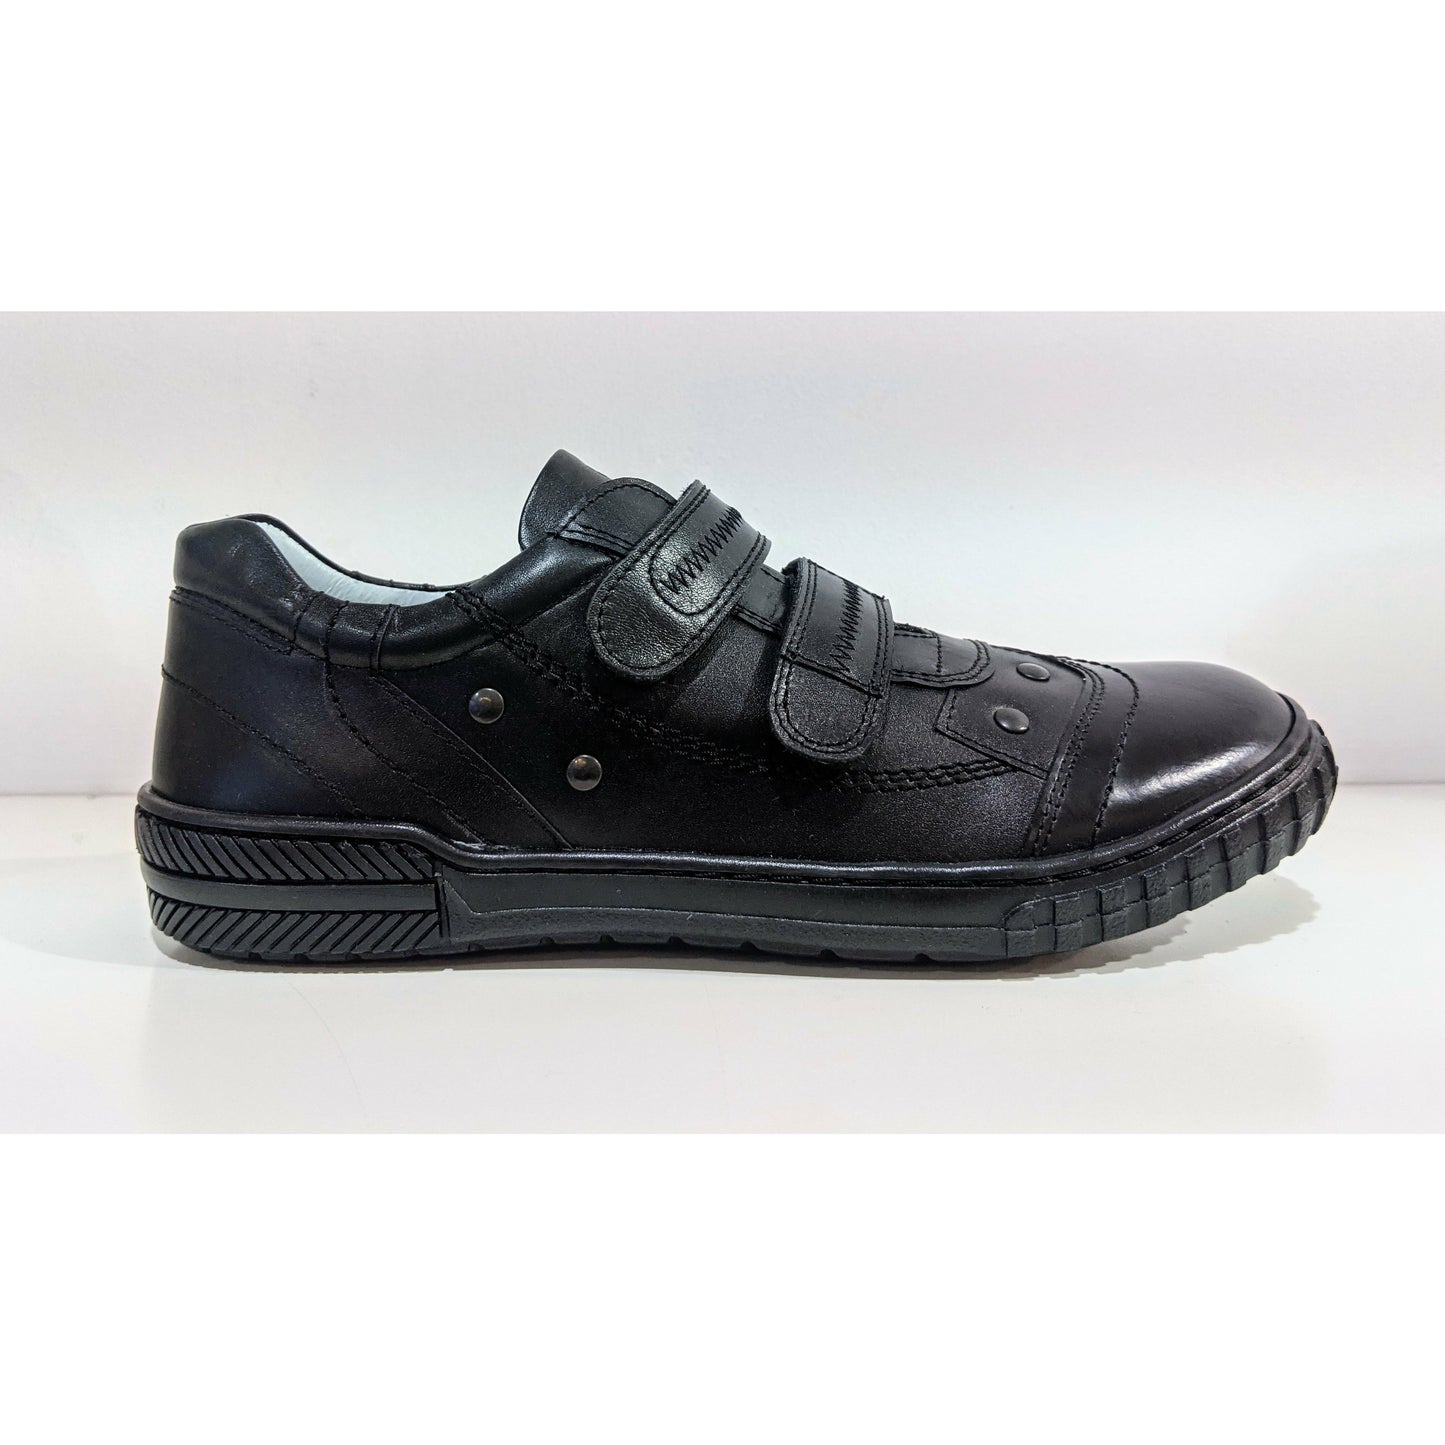 A boys school shoe by Petasil, style Gino, in black with double velcro fastening. Right side view.